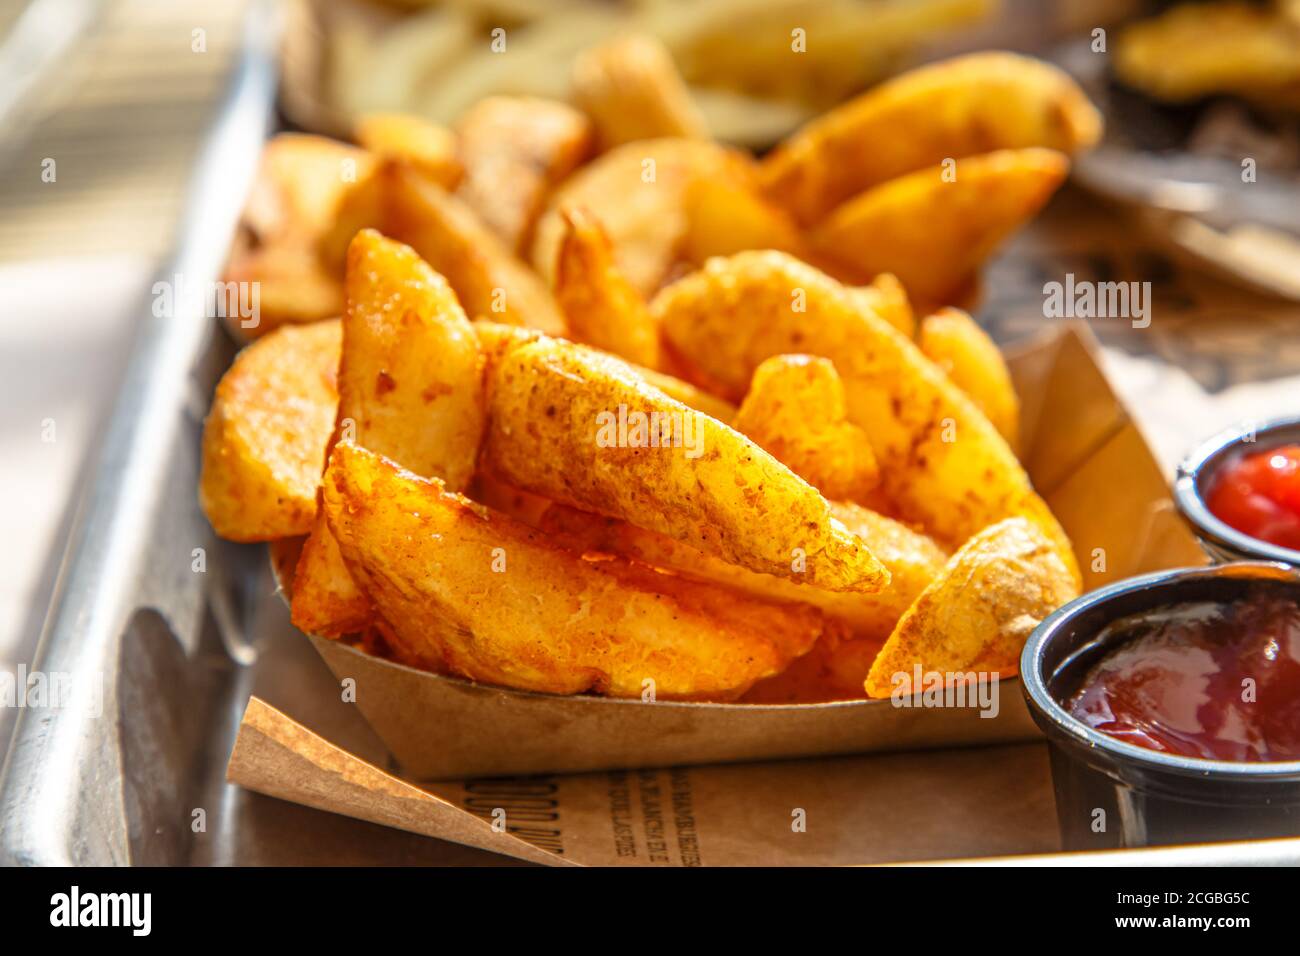 Burgers, potatoes, ketchup and mugs of beer on the table of a street cafe. Stock Photo